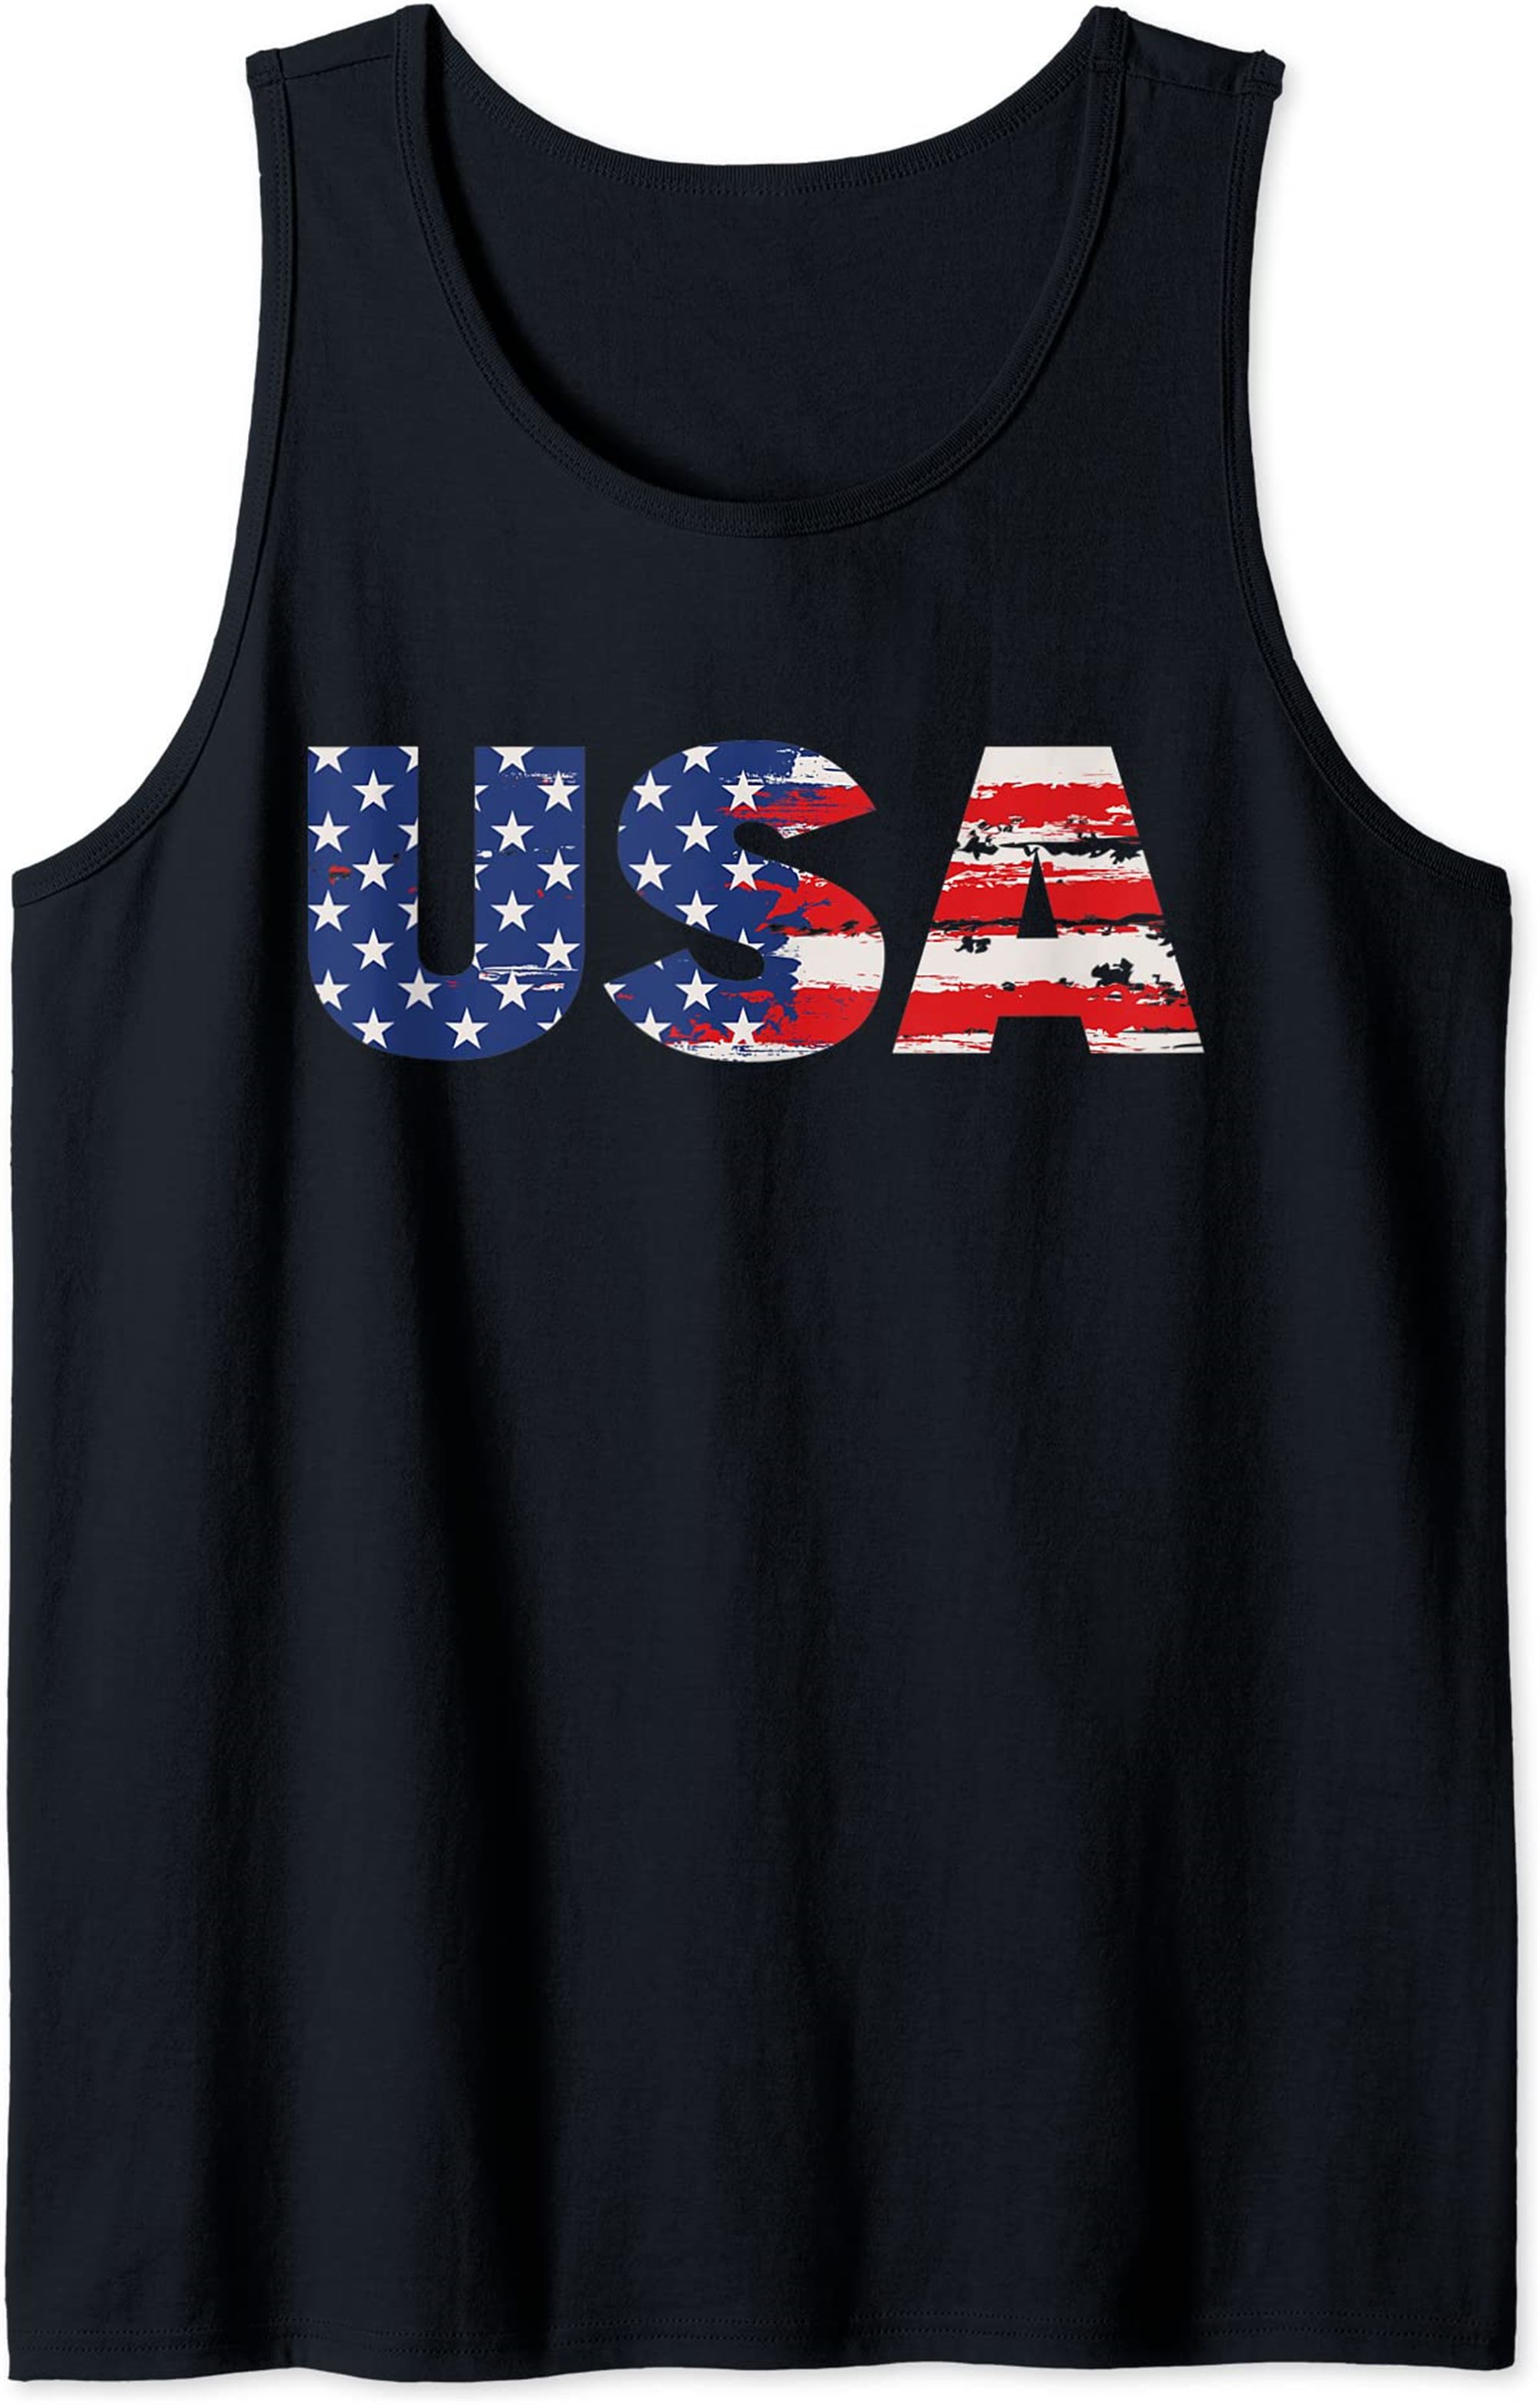 Usa T Shirt Women Men Patriotic American Flag 4th Of July Tank Top Full Size Up To 5xl